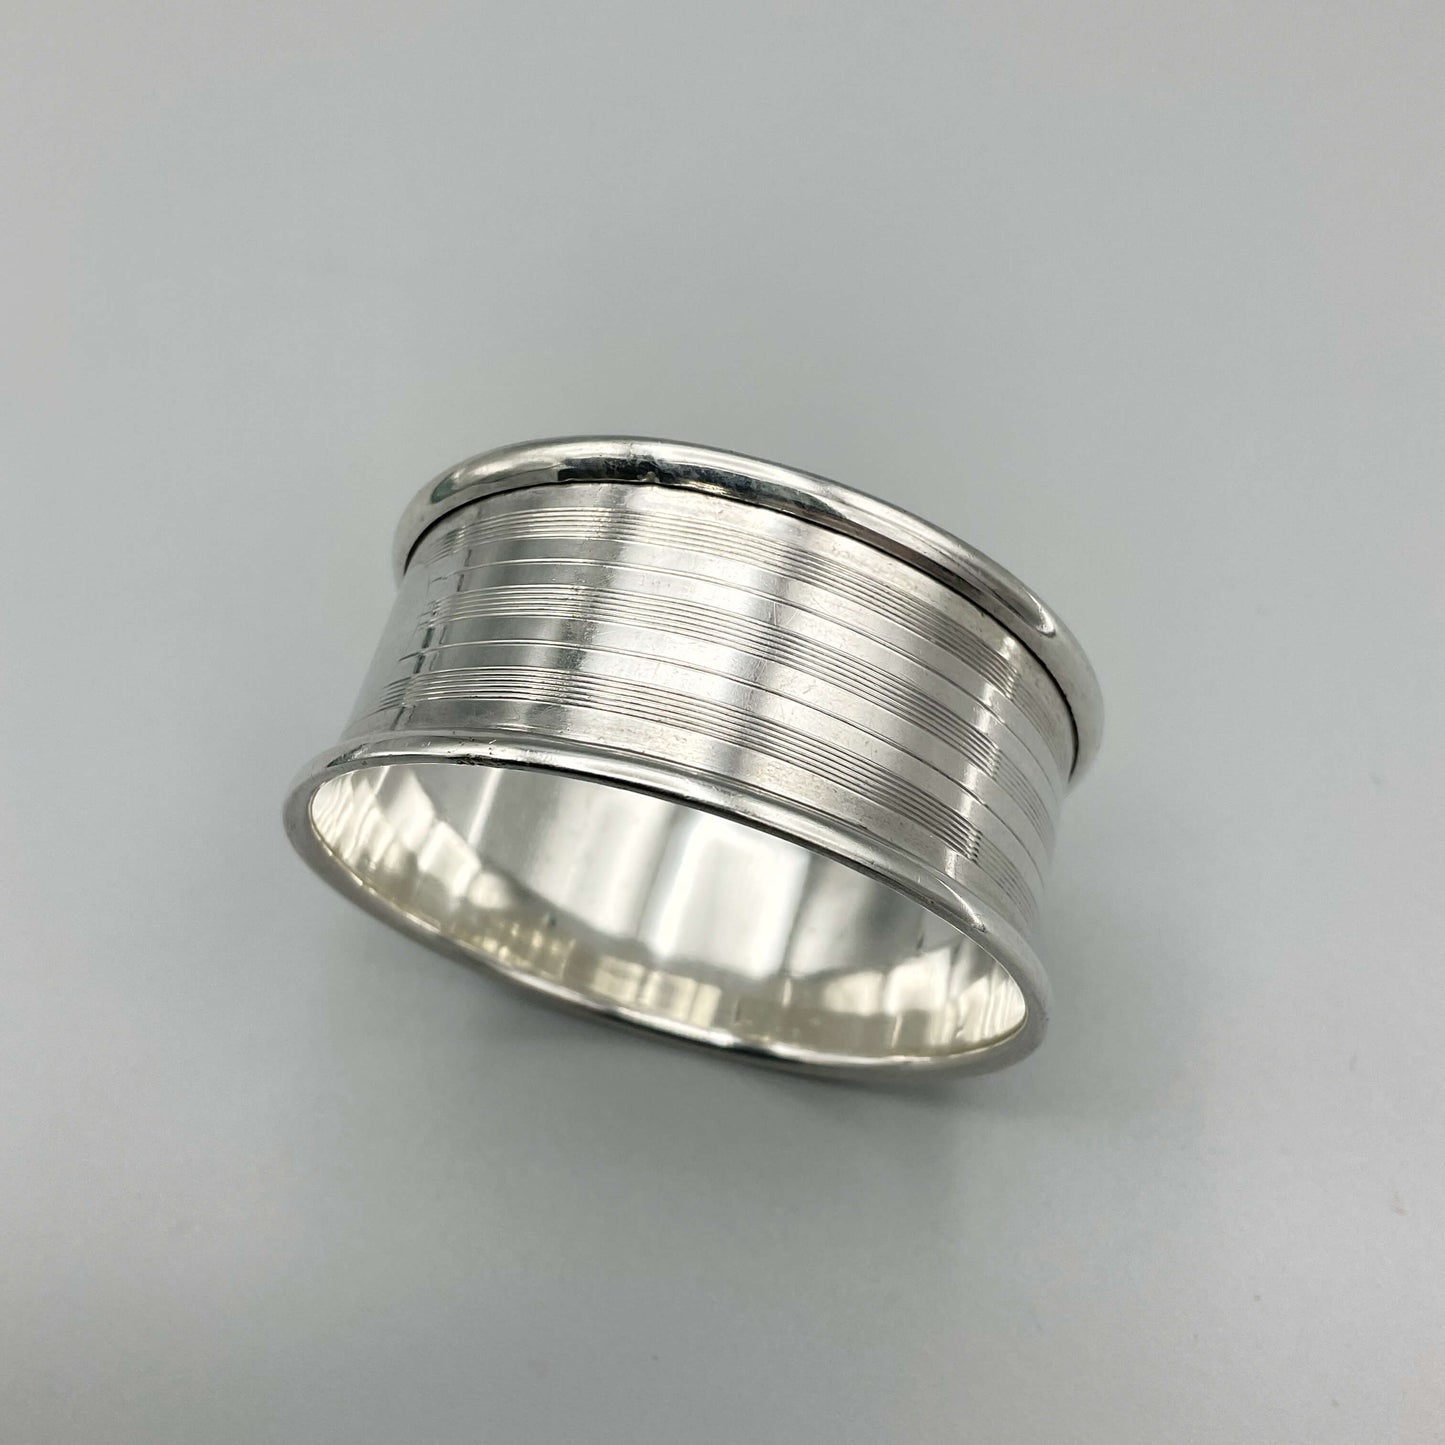 Silver napkin ring with a lined design on a plain background 